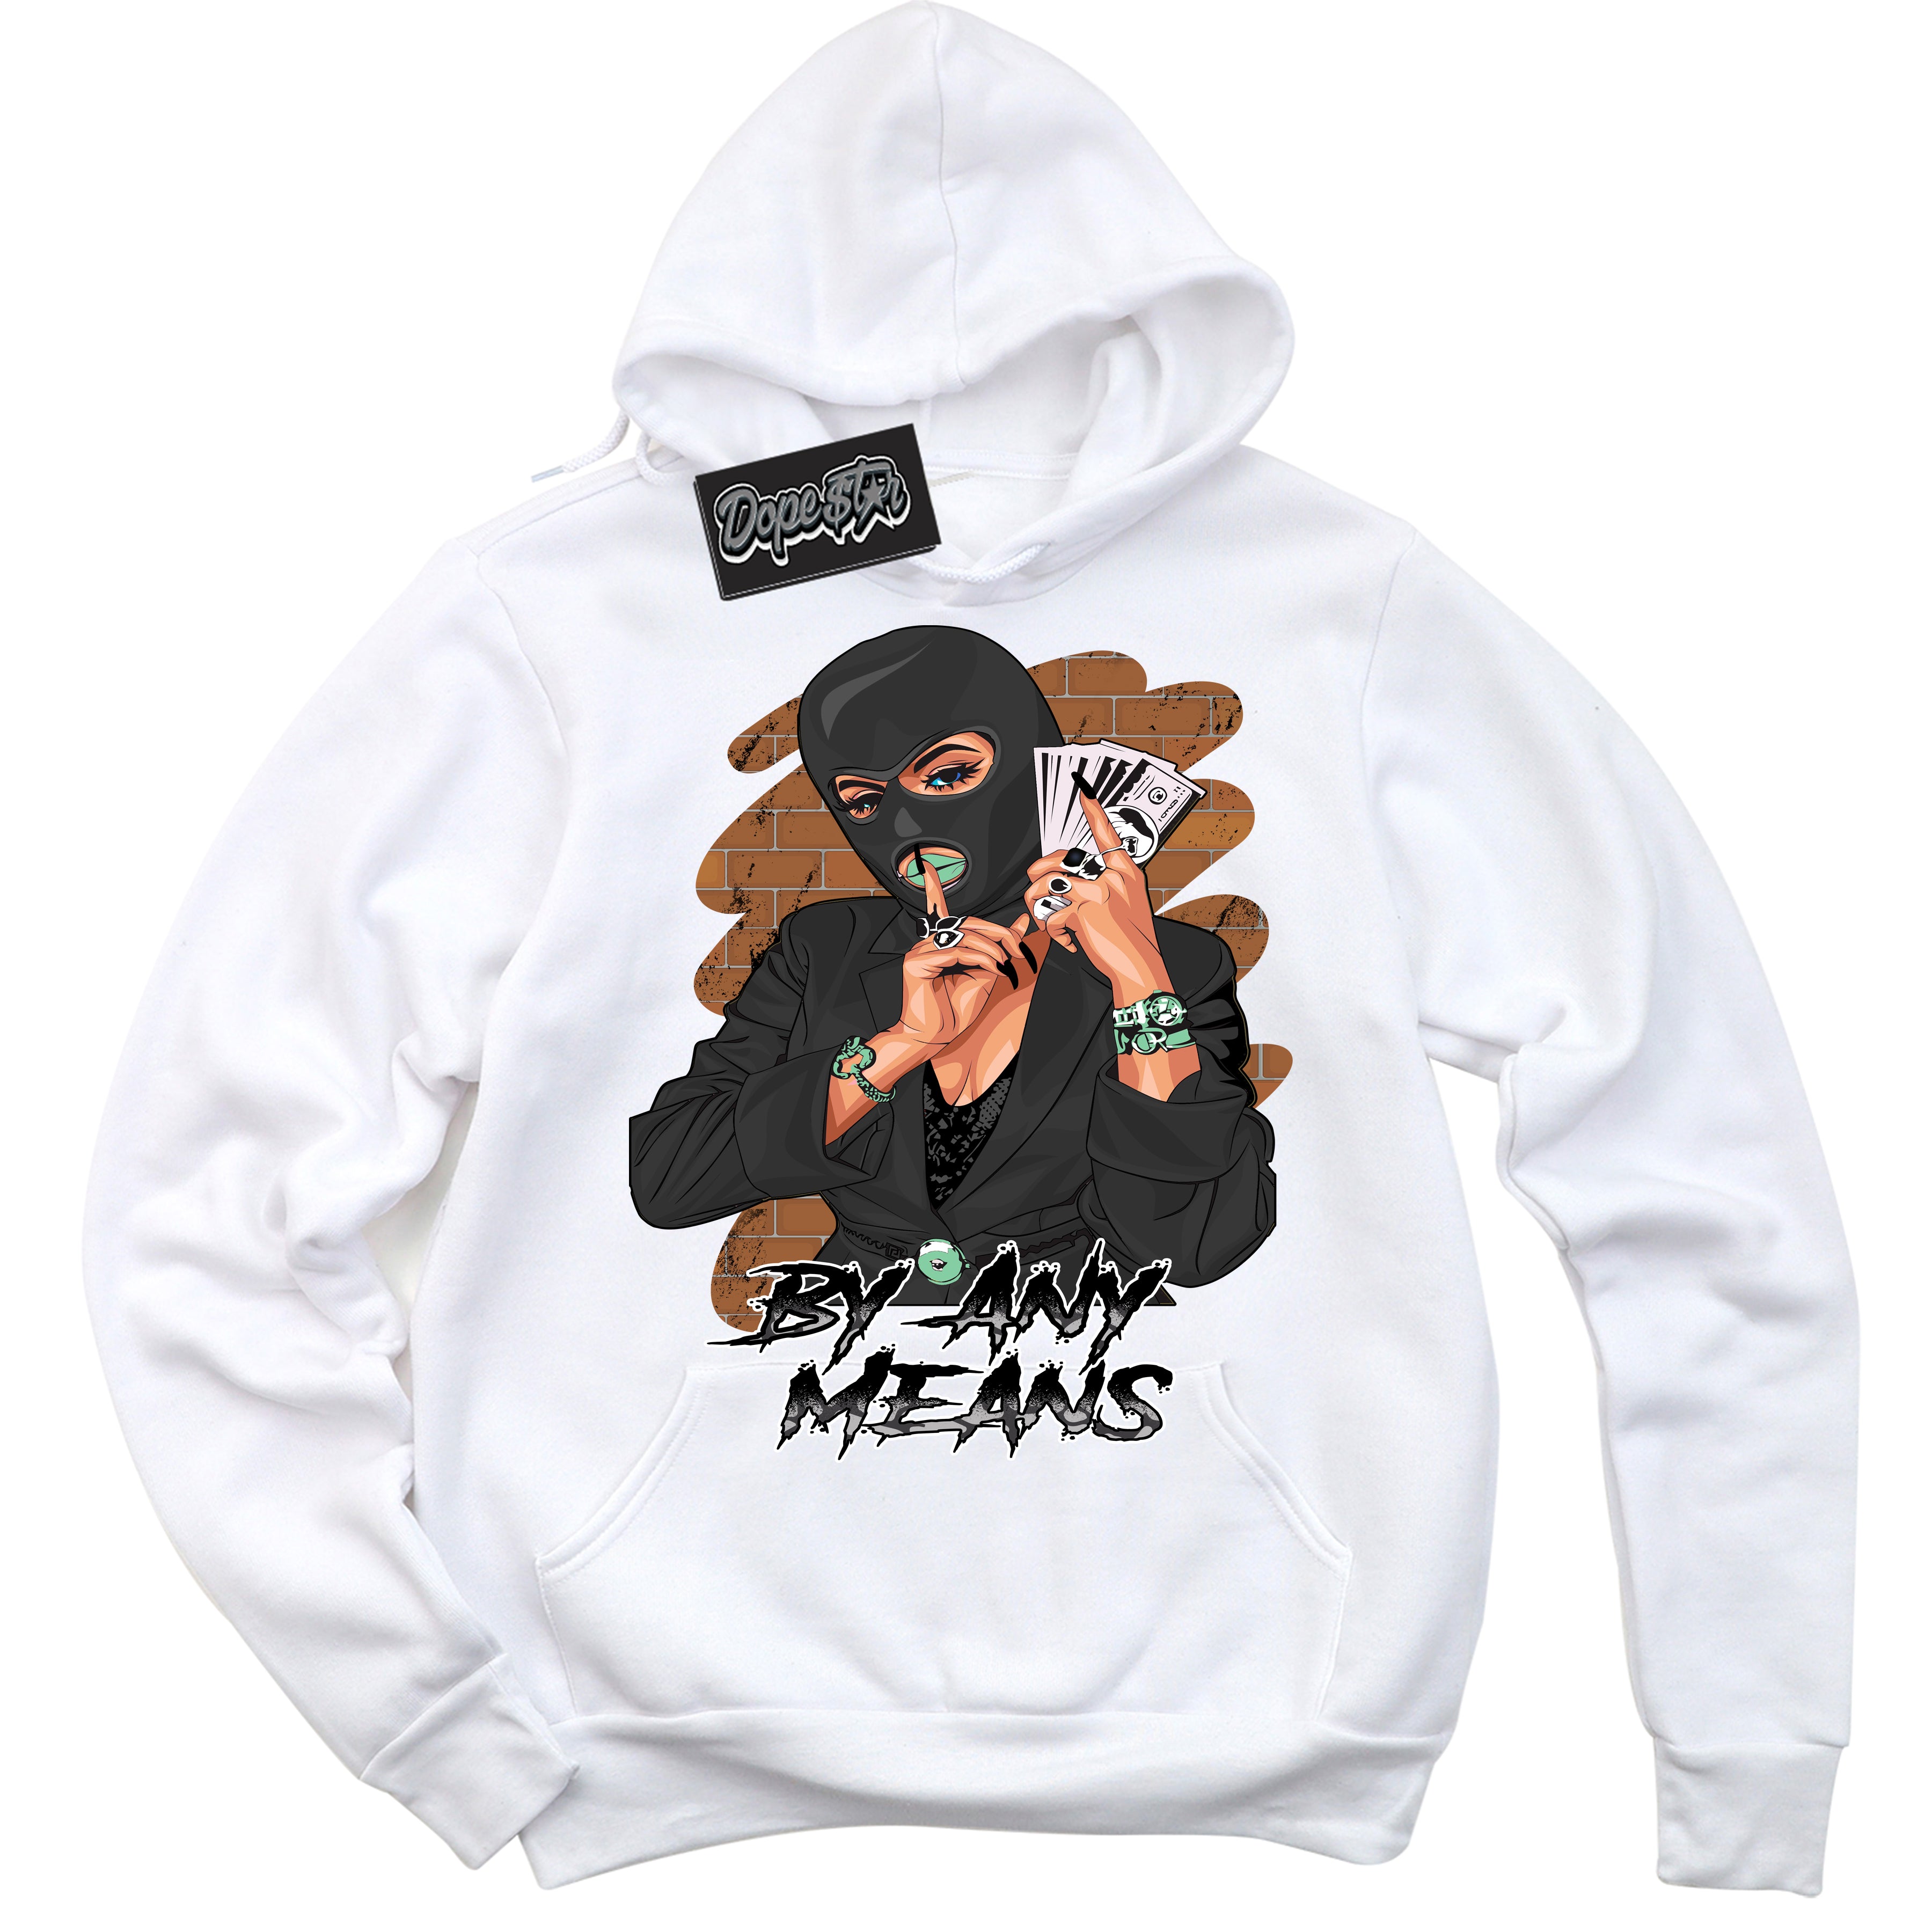 Cool White Graphic DopeStar Hoodie with “ By Any Means “ print, that perfectly matches Green Glow 3s sneakers